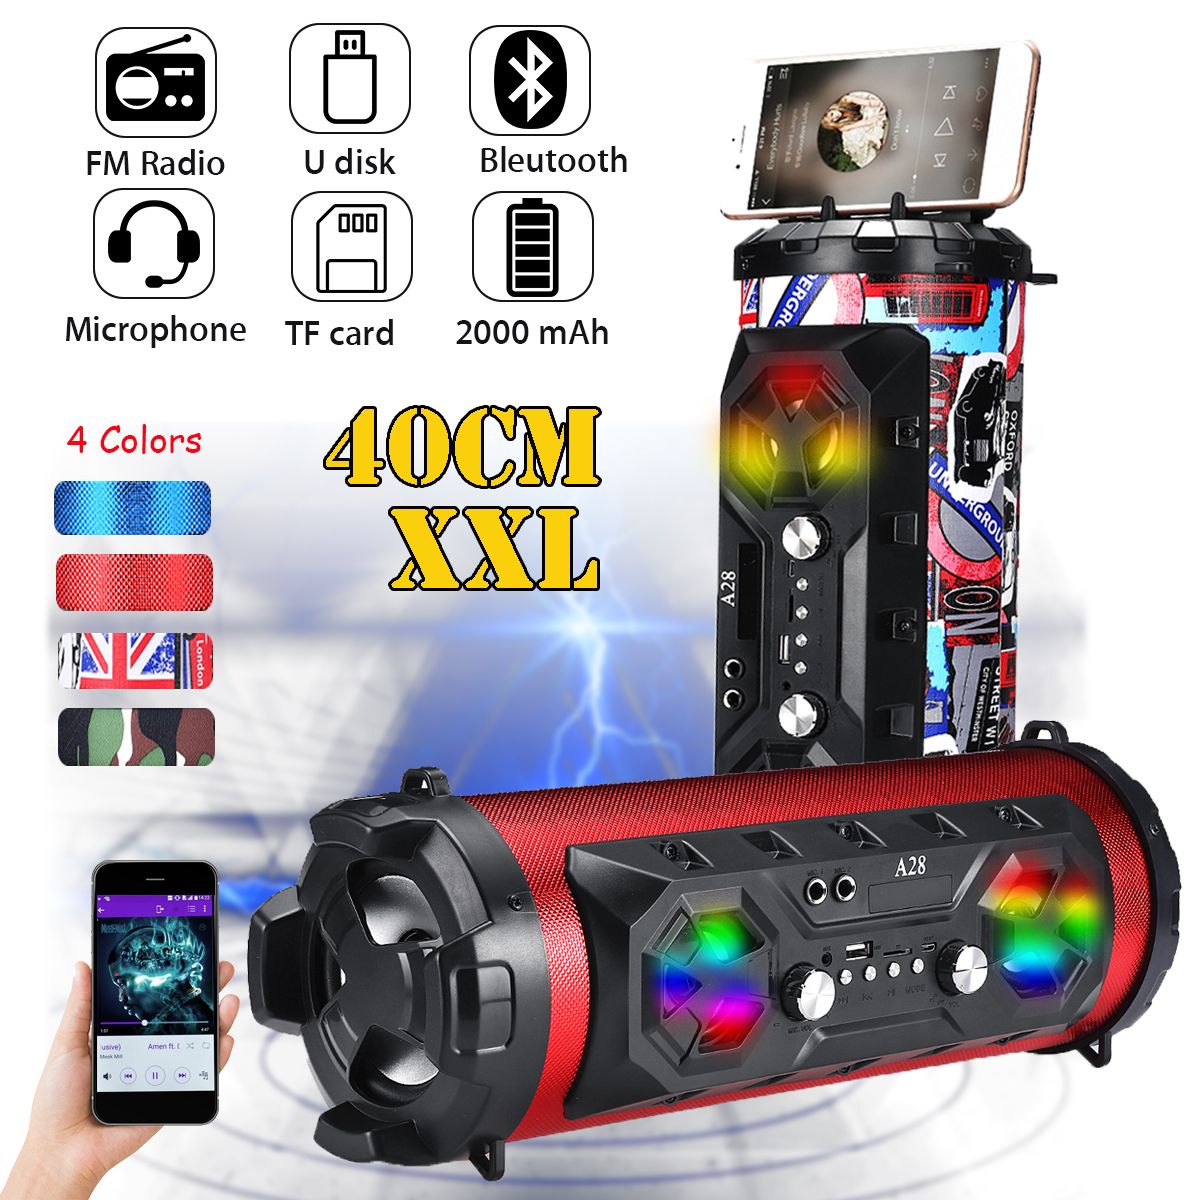 A28-Portable-bluetooth-Super-Bass-Speaker-Phone-Holder-TF-FM-AUX-in-Outdoor-Handsfree-Headset-With-M-1412991